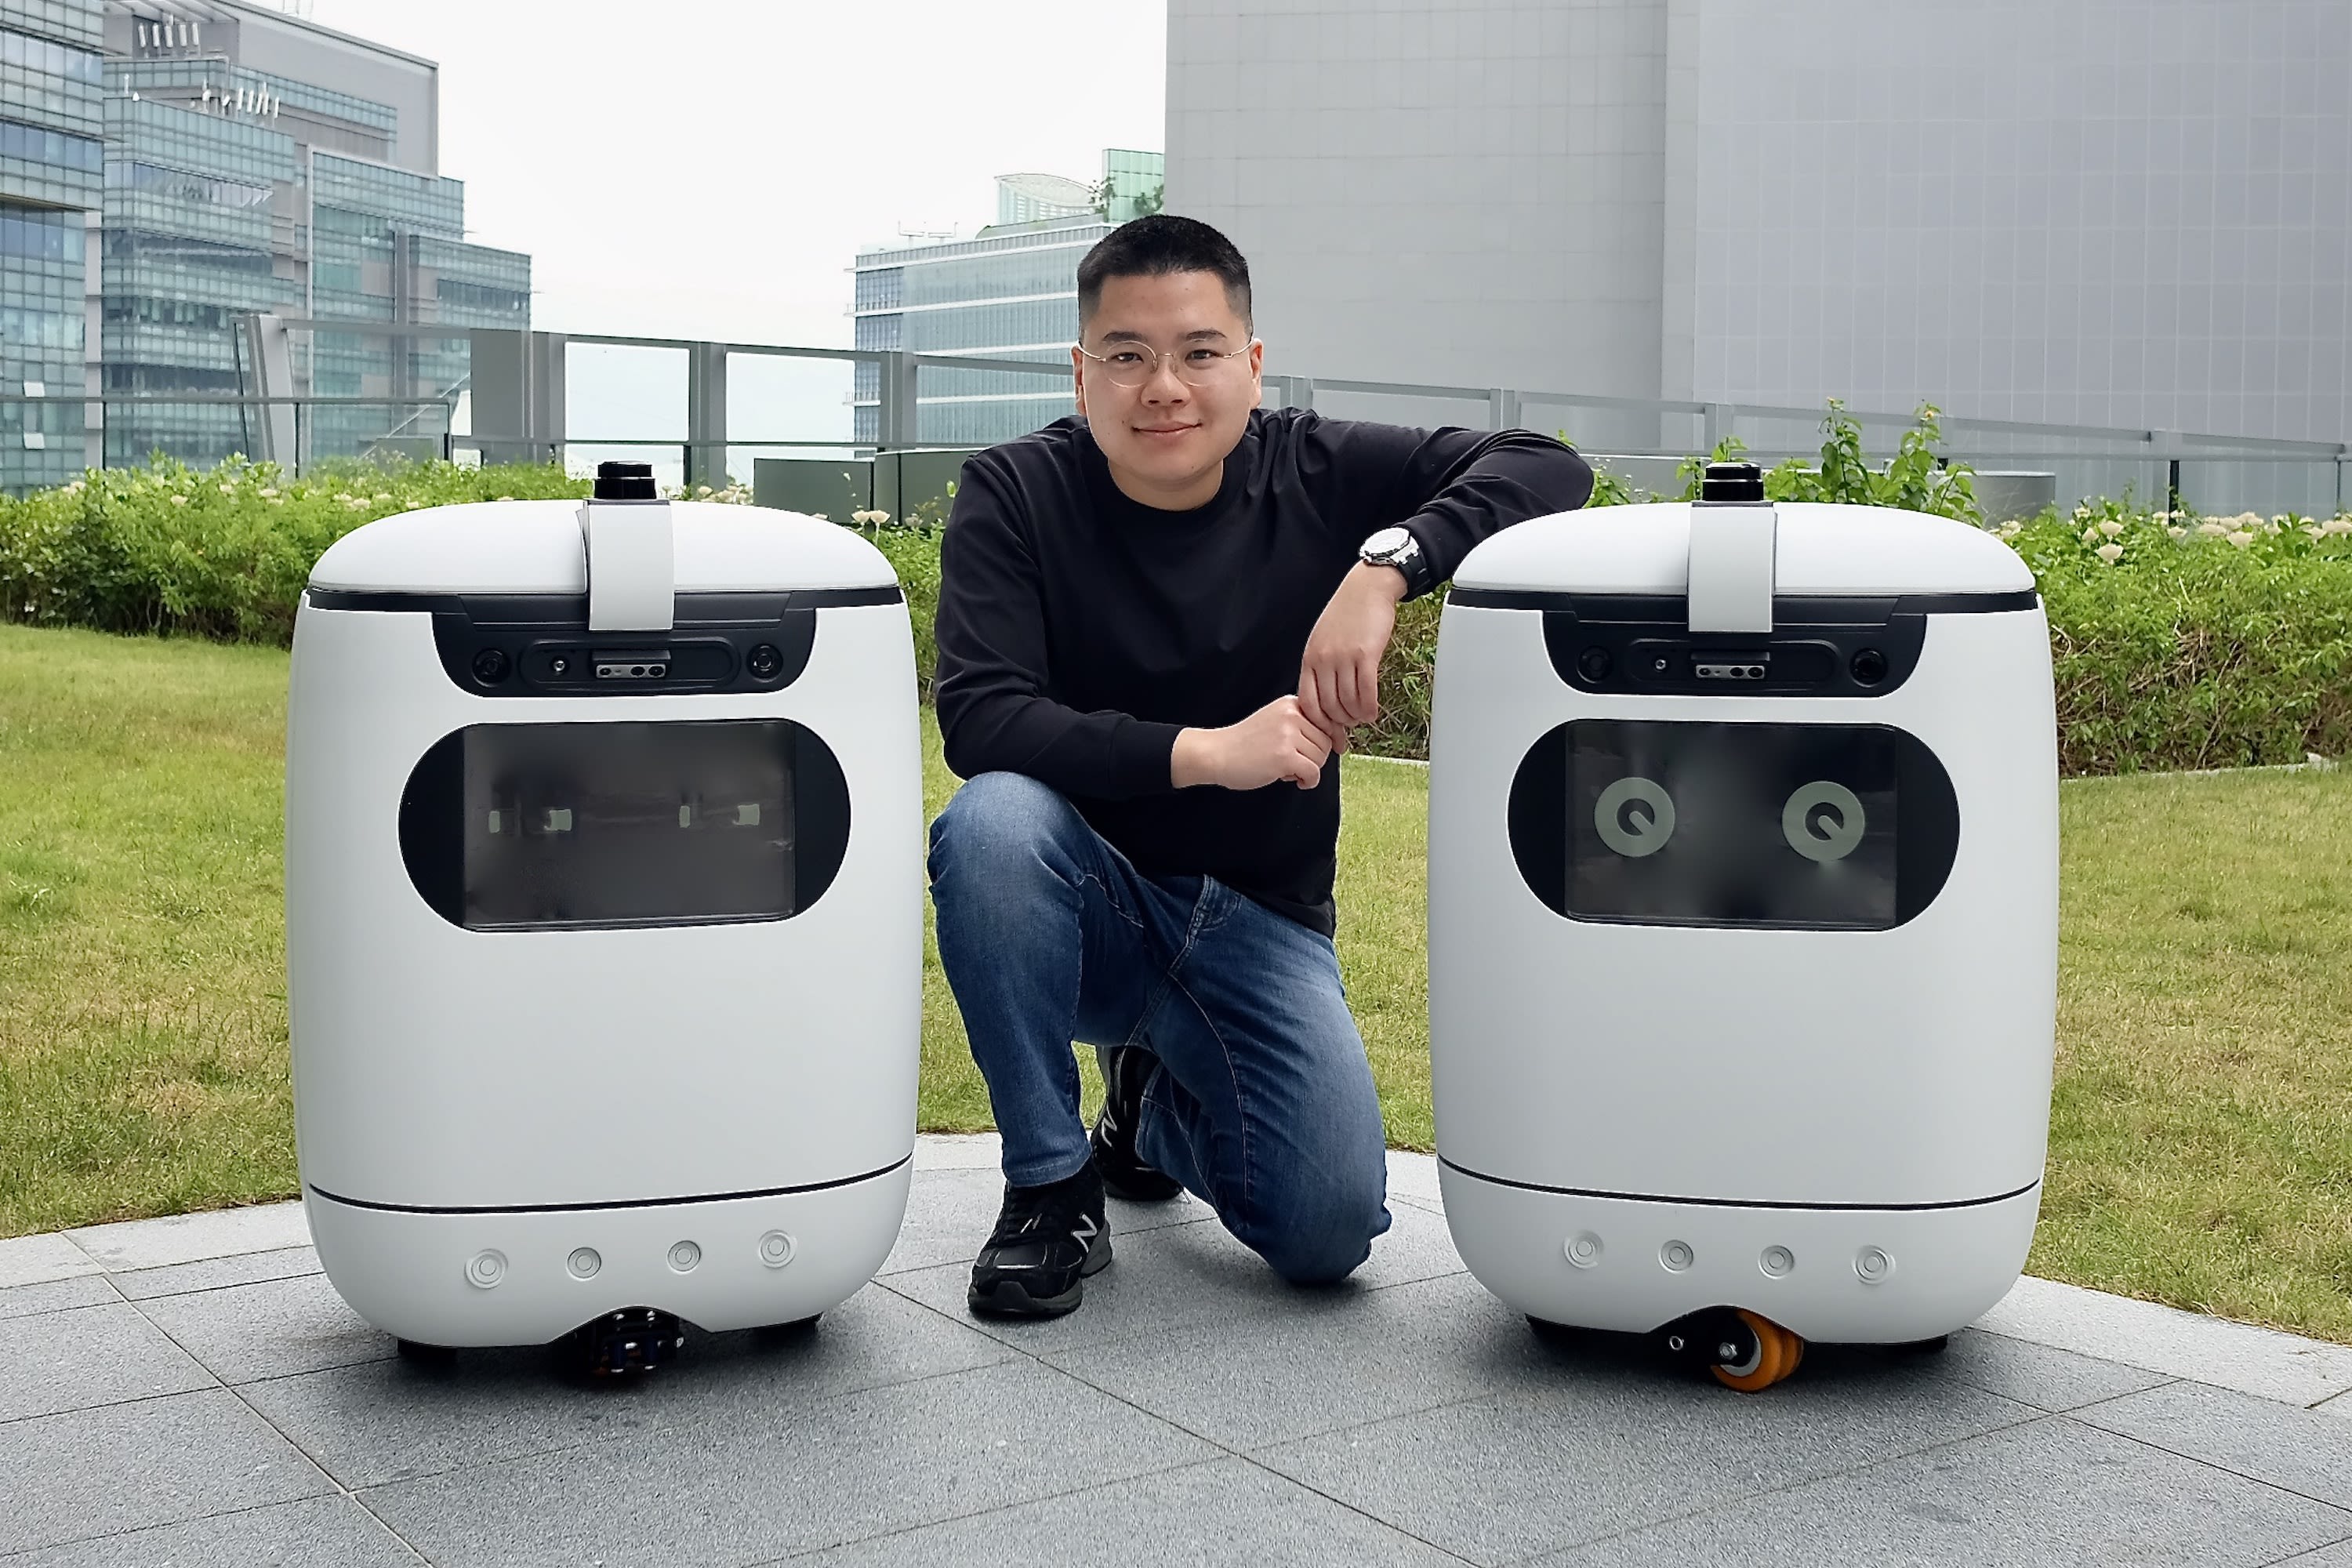 <strong>Your friendly neighborhood robot:</strong> Facing rising costs and labor shortages, the hospitality sector is searching for high-tech solutions -- and robotics companies are answering the call. Hong Kong-based tech startup <a href="index.php?page=&url=https%3A%2F%2Fwww.ricerobotics.com%2F" target="_blank" target="_blank">Rice Robotics</a> has deployed its cute, charismatic delivery robot in hotels, cafes and offices in Japan and Hong Kong. <strong>Check out the other service bots giving hospitality a helping hand. </strong>